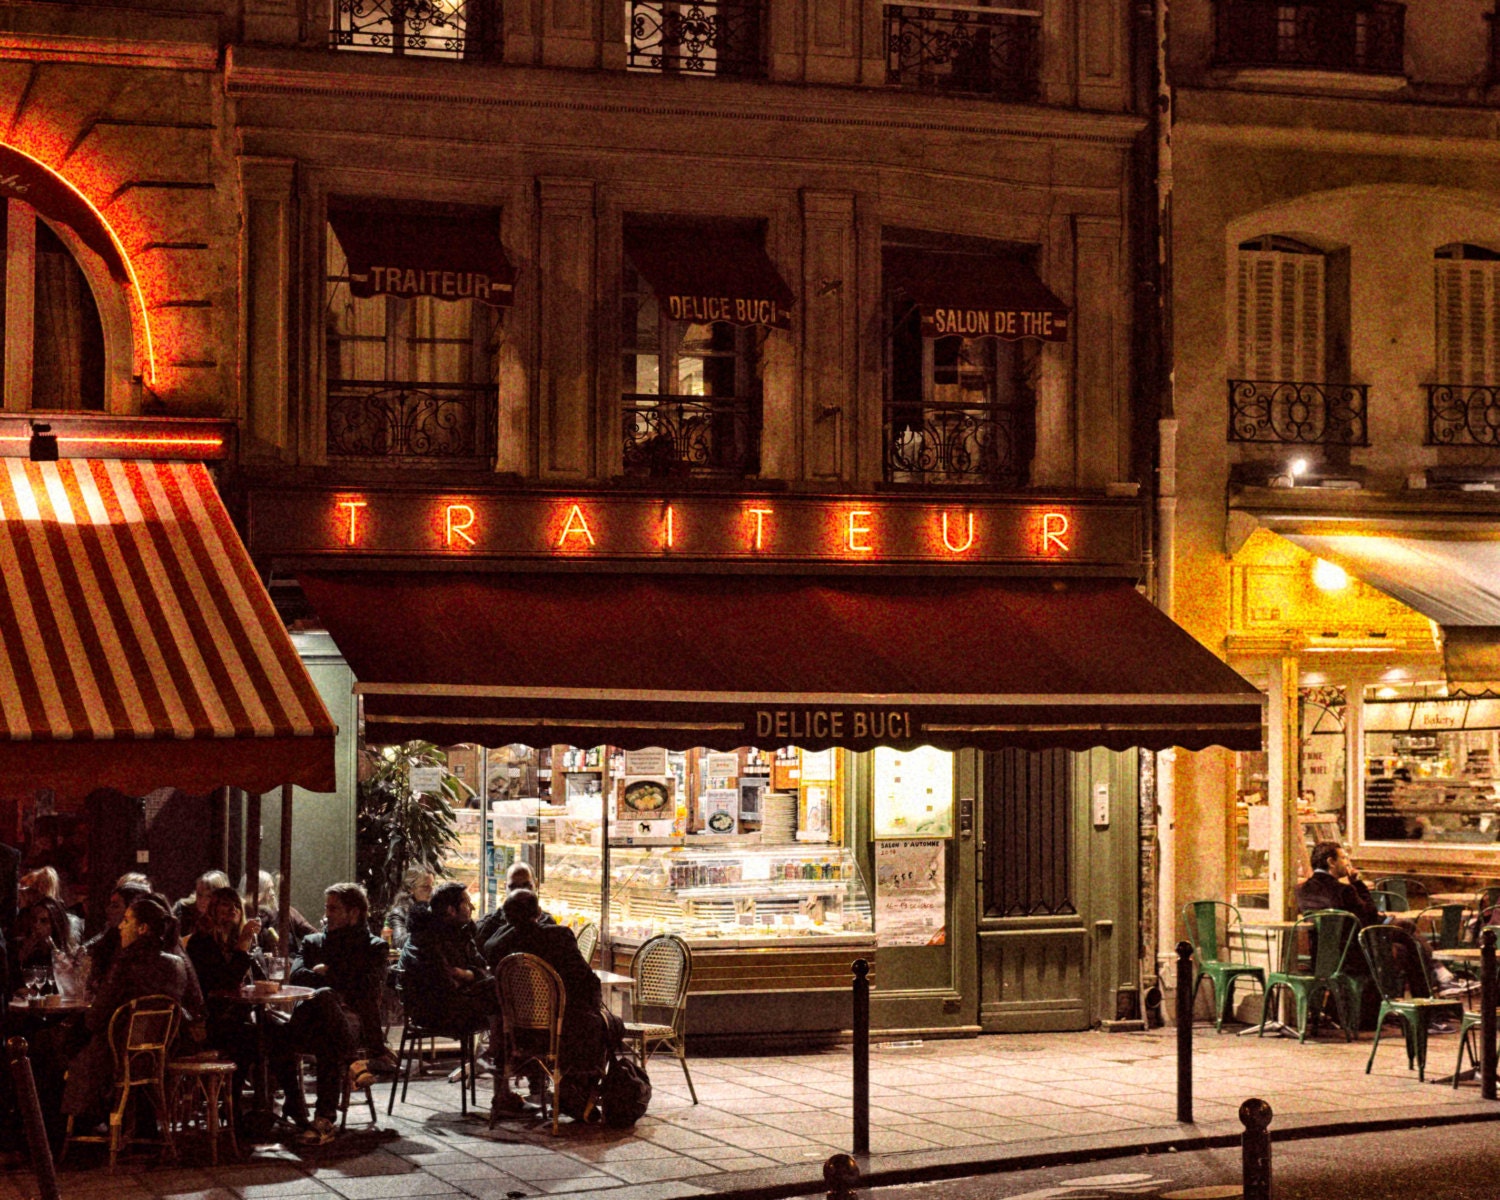  Sidewalk  Cafe  at Night in Paris  France  Photography French 